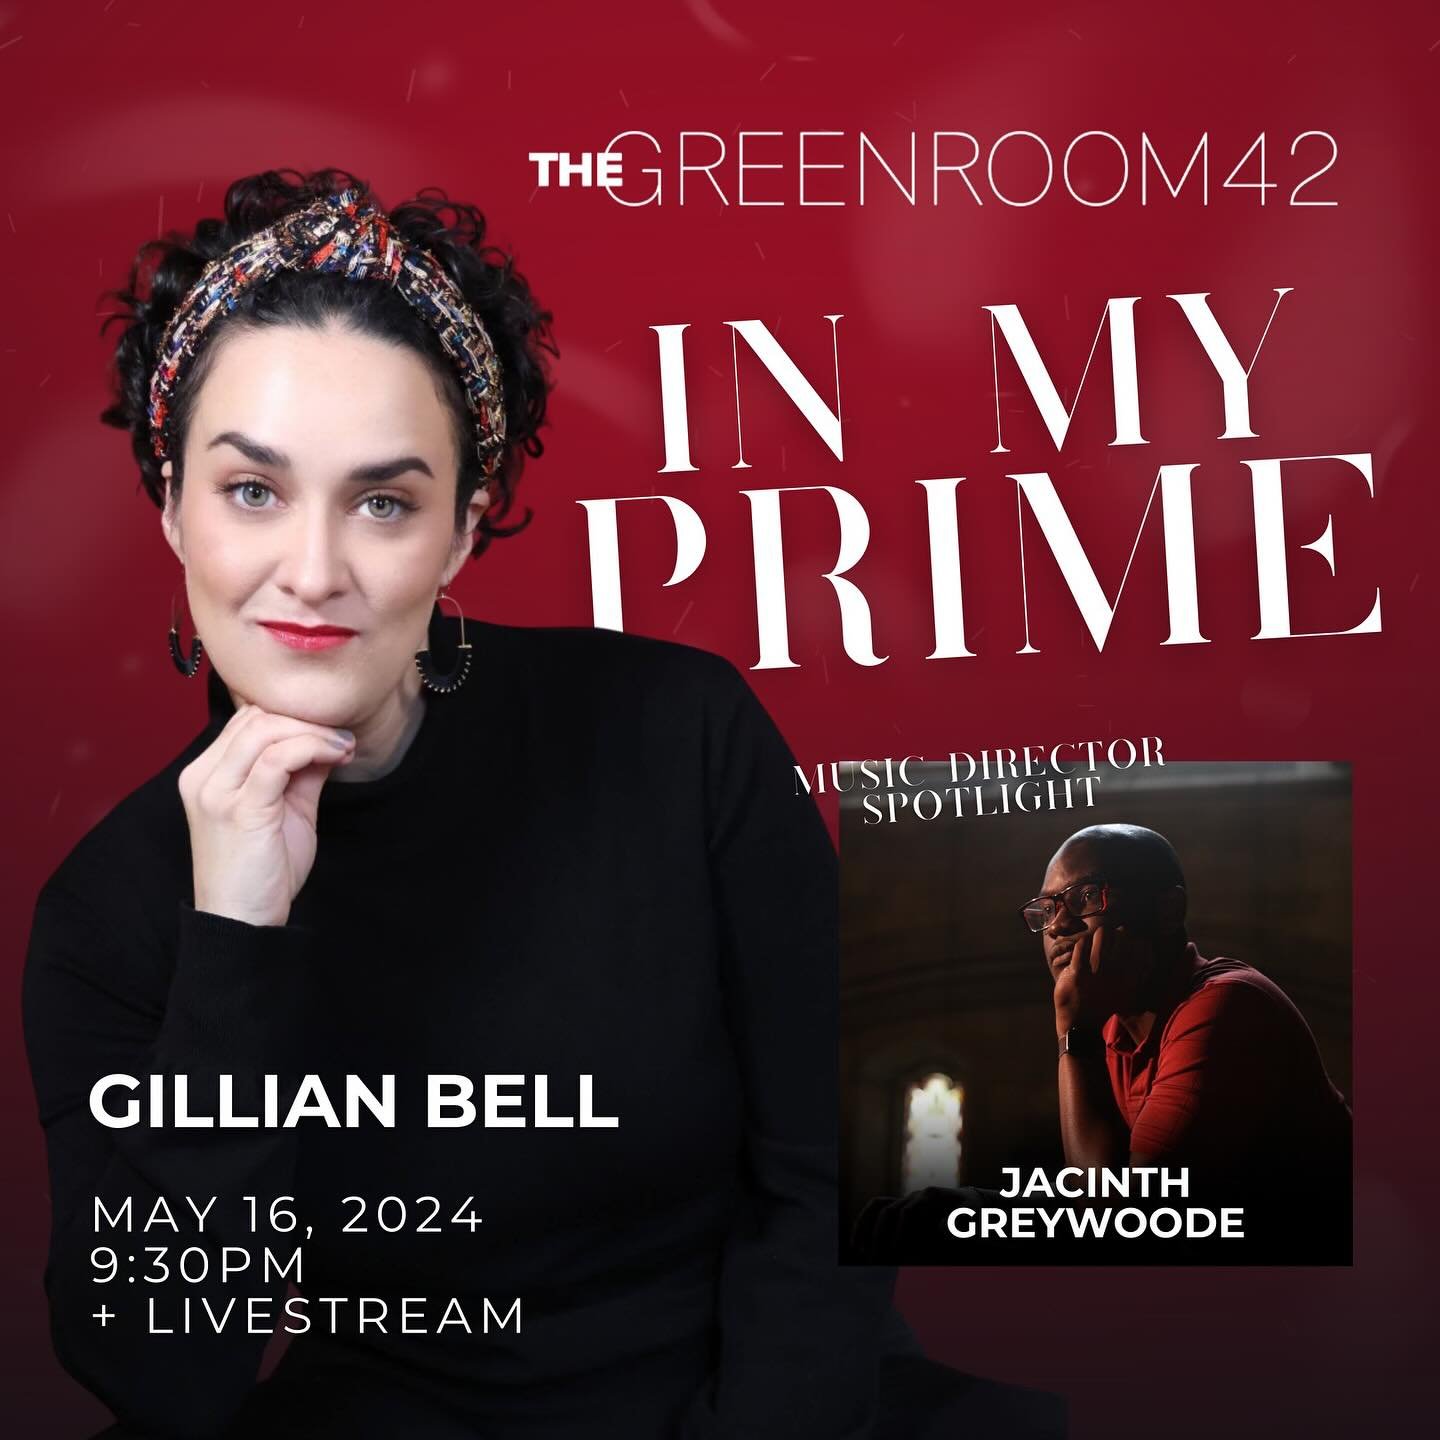 Thrilled to be teaming up with my friend and Music Director @j.greywoode for IN MY PRIME at @thegreenroom42 on May 16th! Hope to see you there 🎶 

Jacinth Greywoode is a Brooklyn-based composer and music director. Recent credits include orchestratio